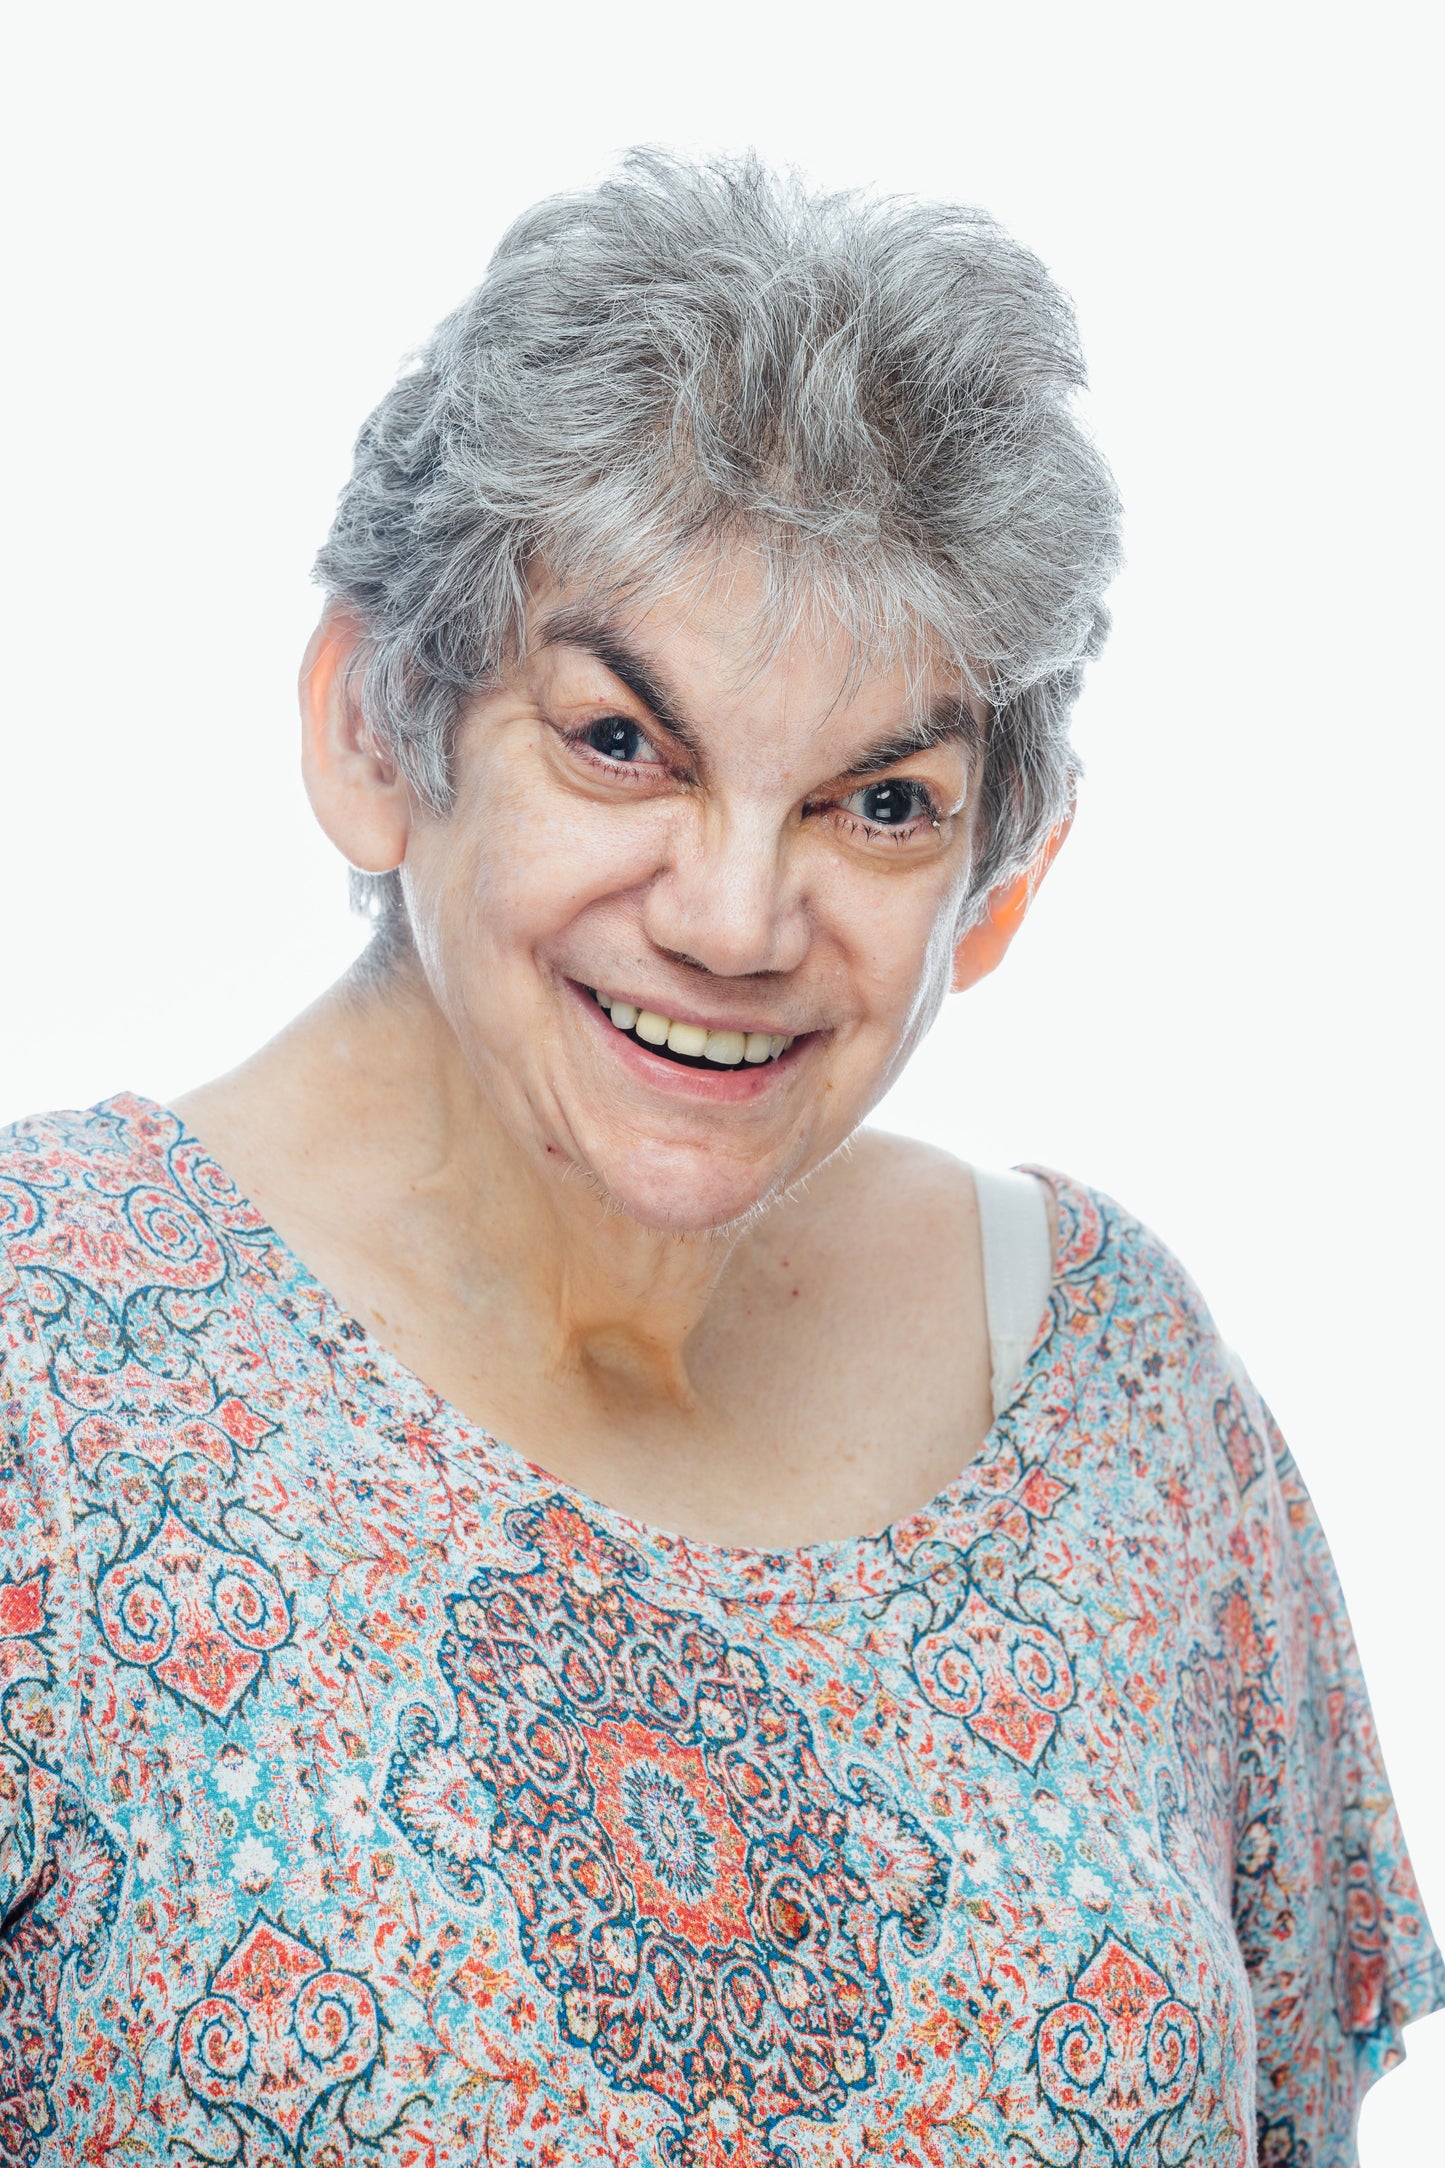 Smiling woman with gray hair and multicolored blouse